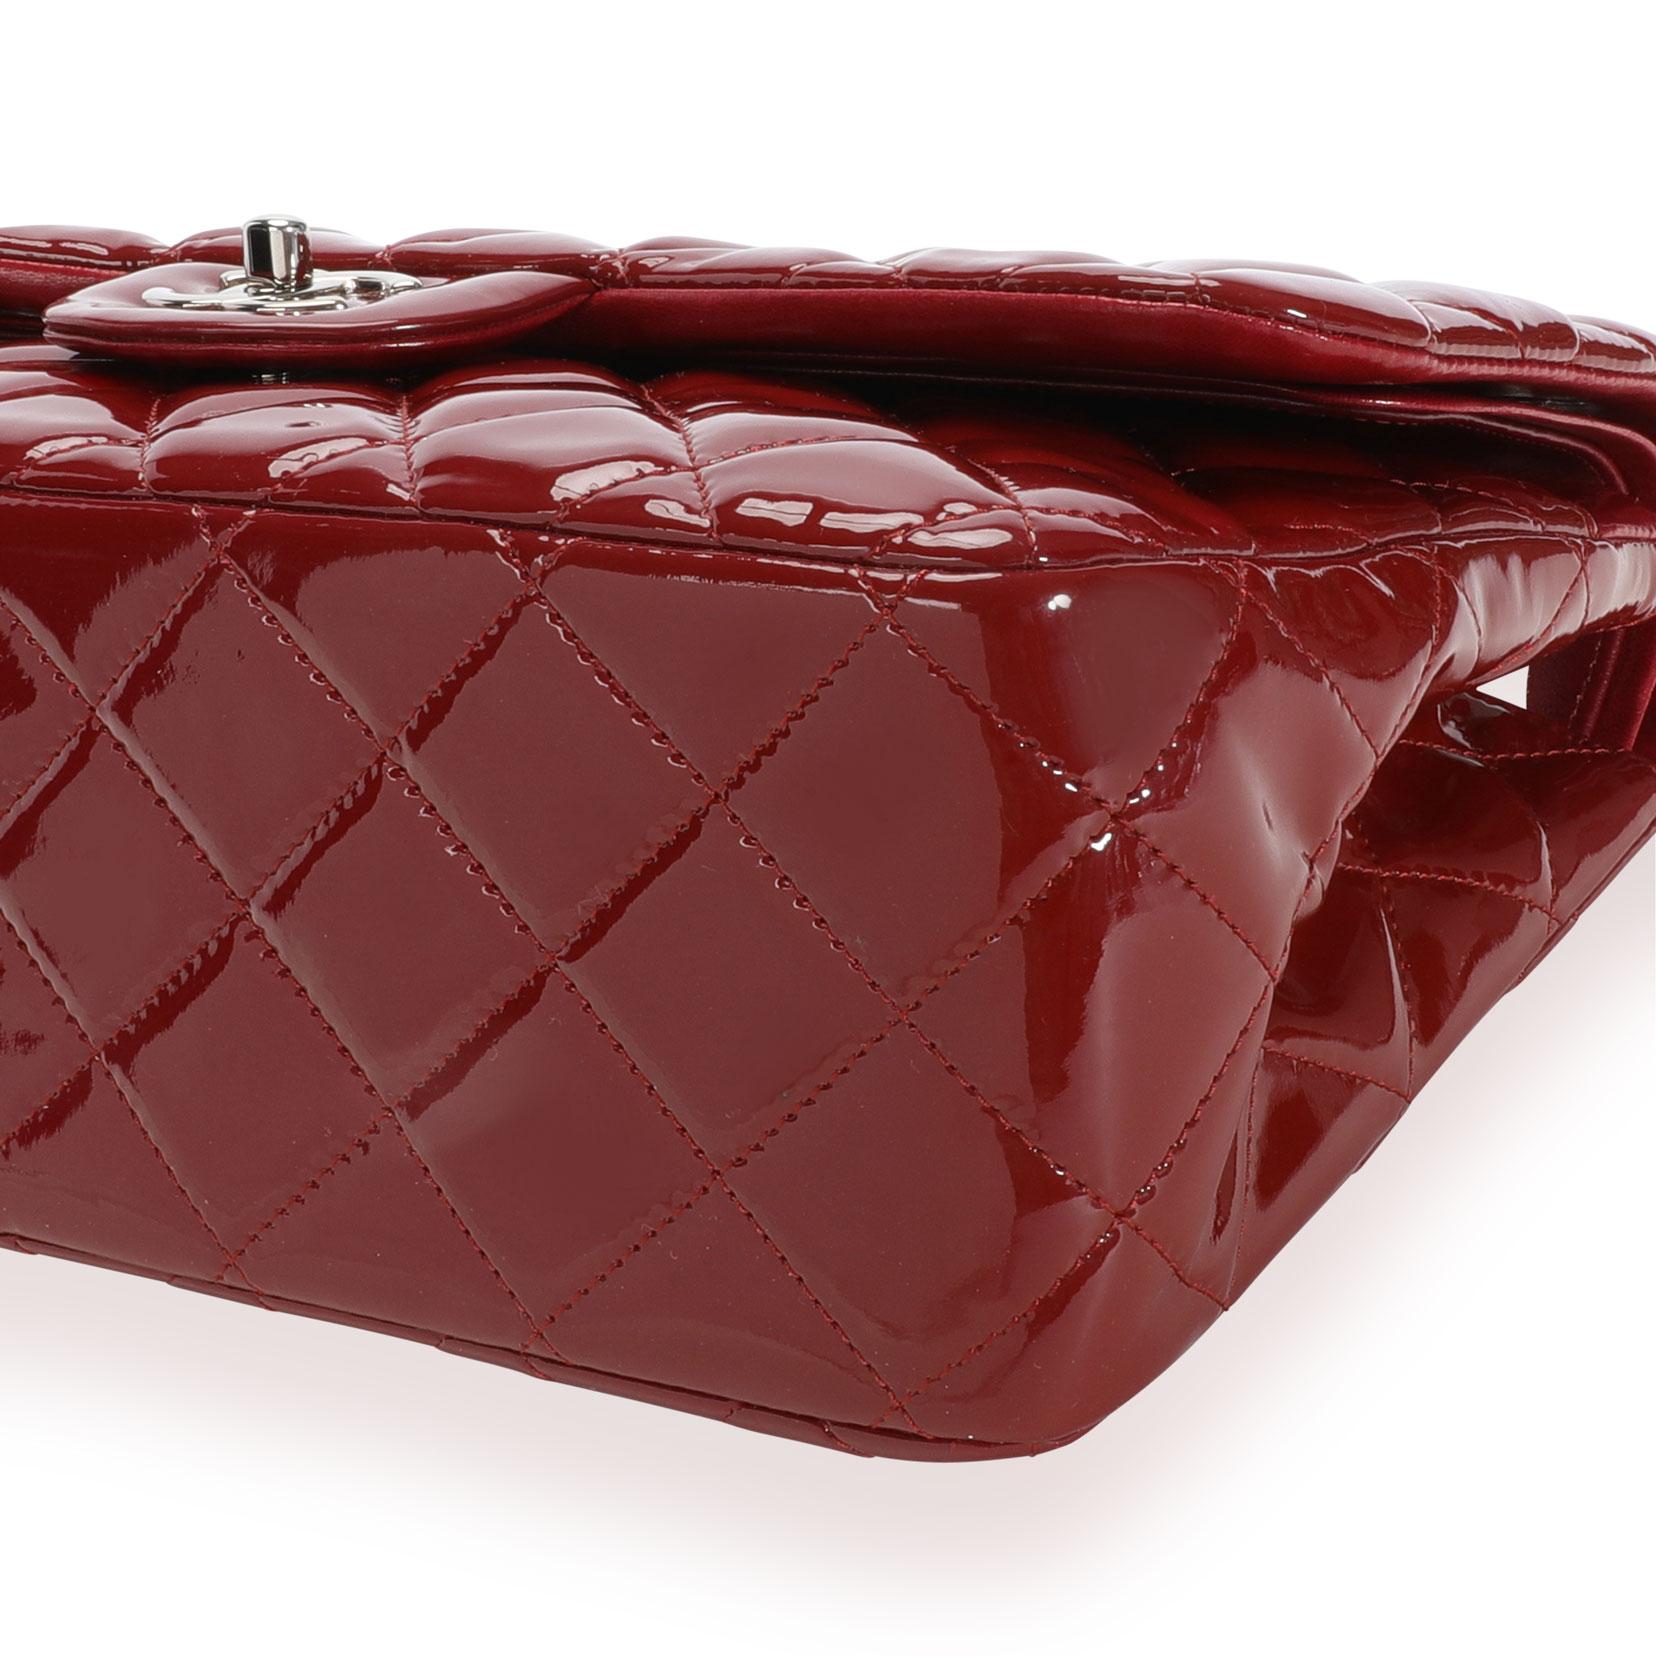 Women's Chanel Red Quilted Patent Leather Jumbo Classic Double Flap Bag